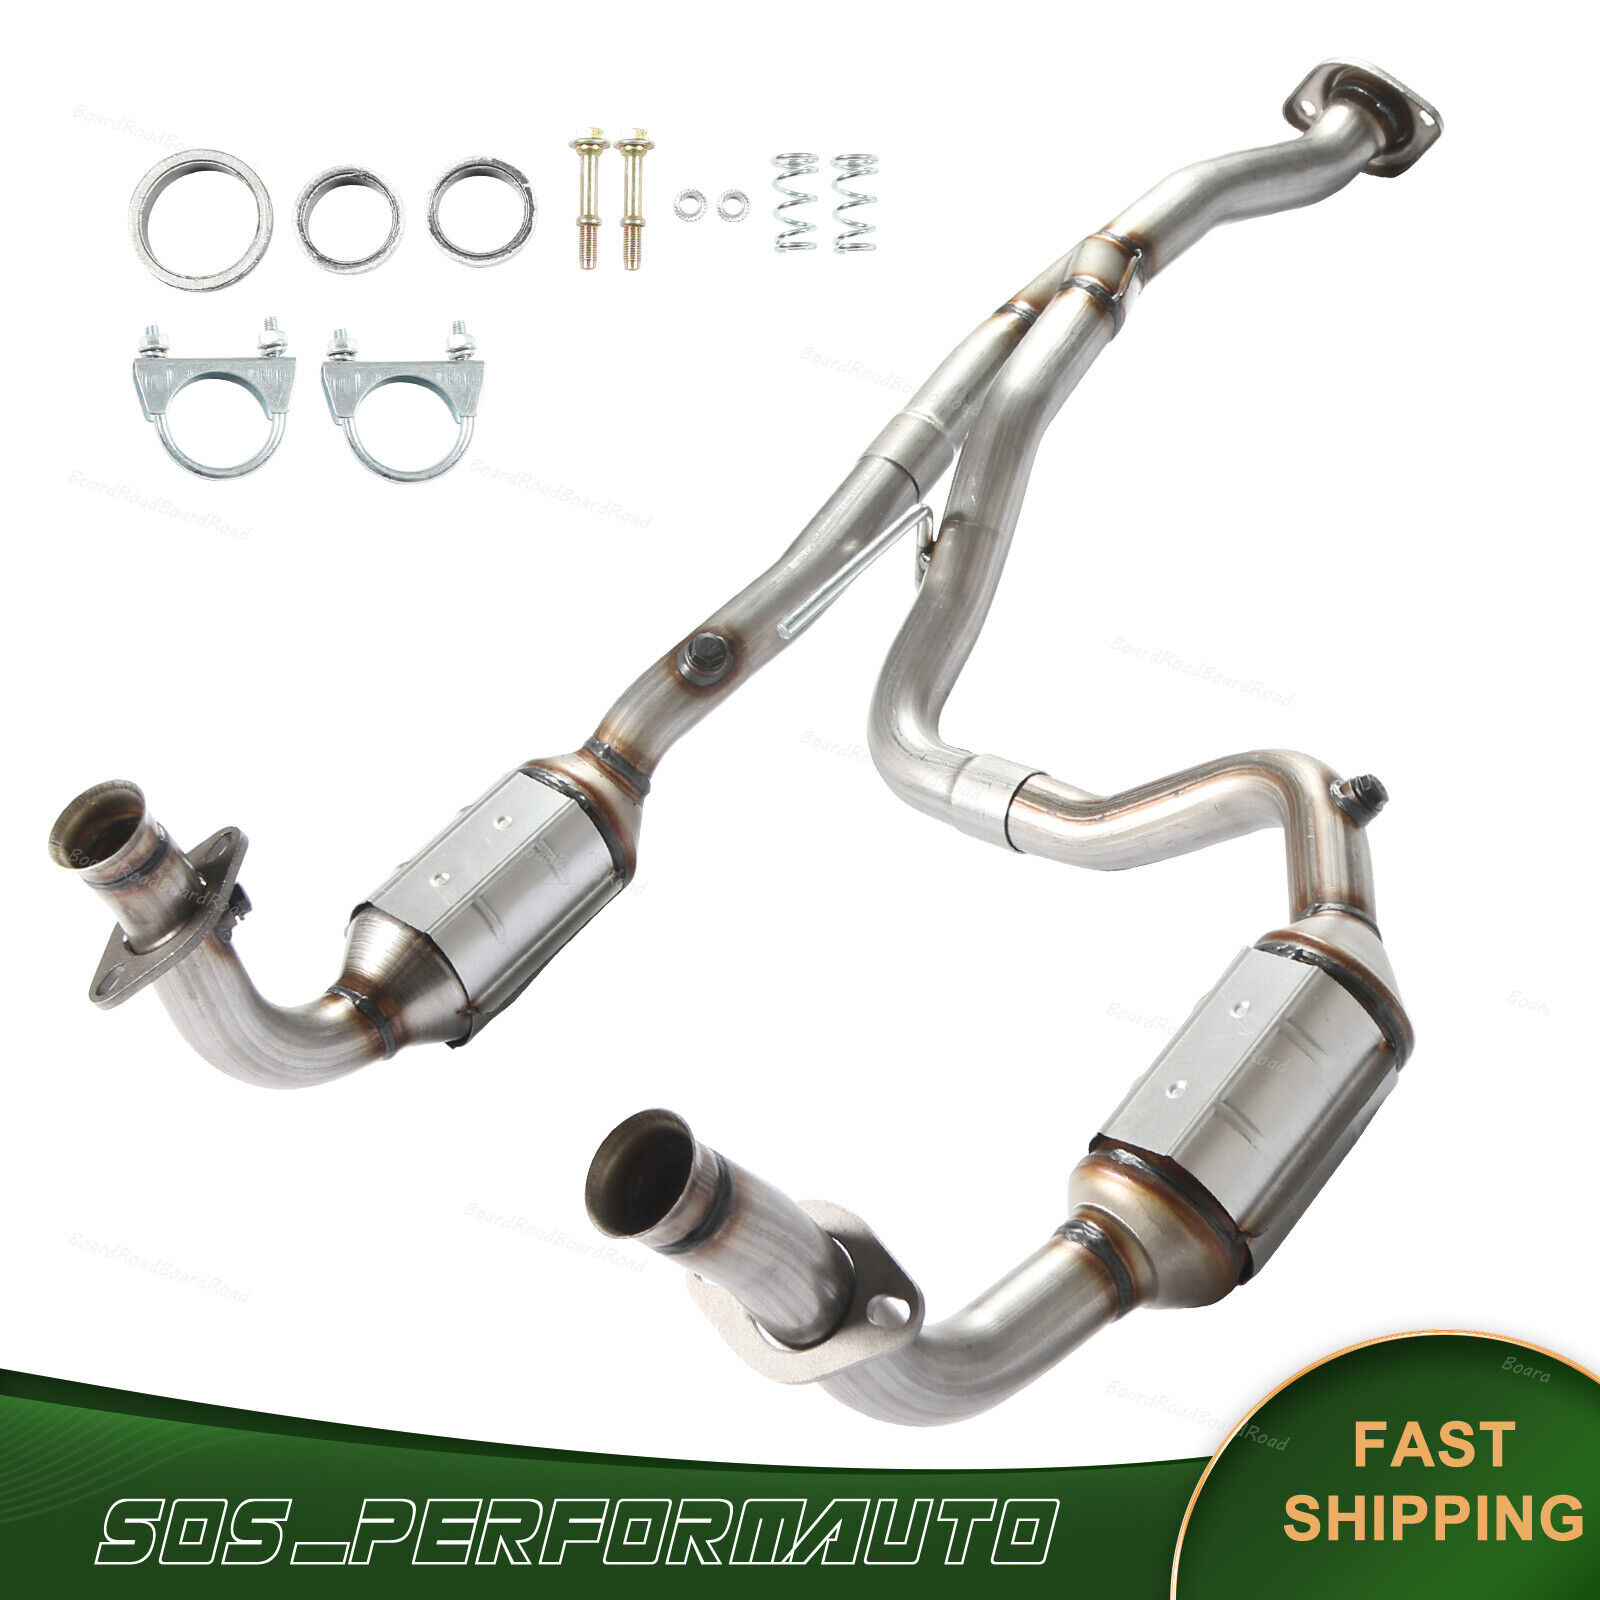 FITS 2005-2007 JEEP Liberty 3.7L Y Pipe Catalytic Converters EPA OBDII APPROVED